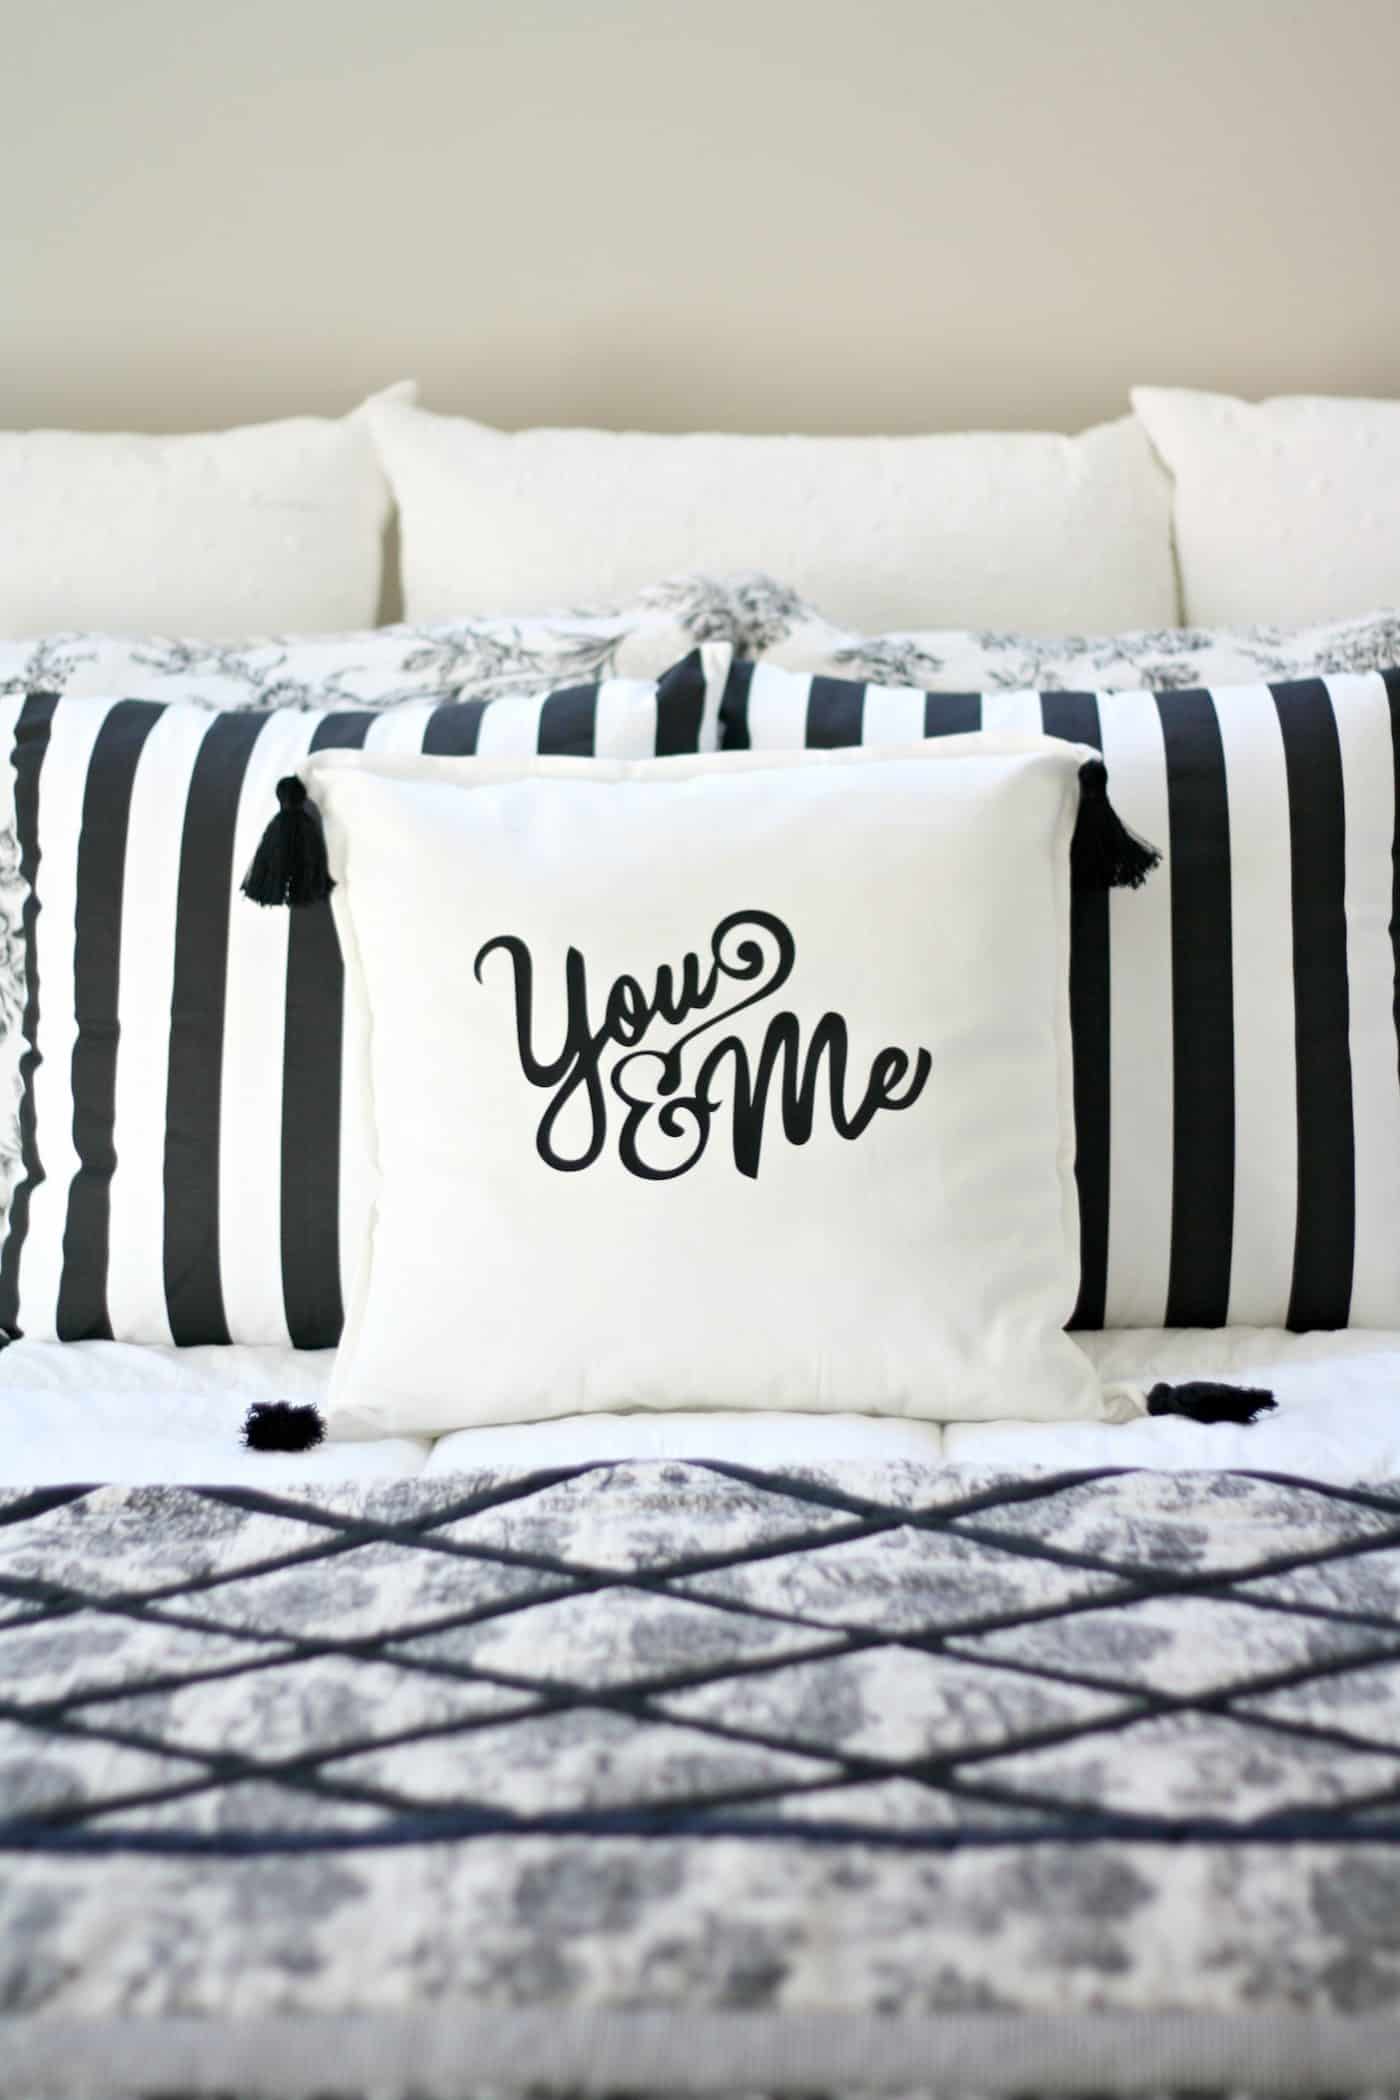 DIY decorative pillow cover with Expressions heat transfer vinyl